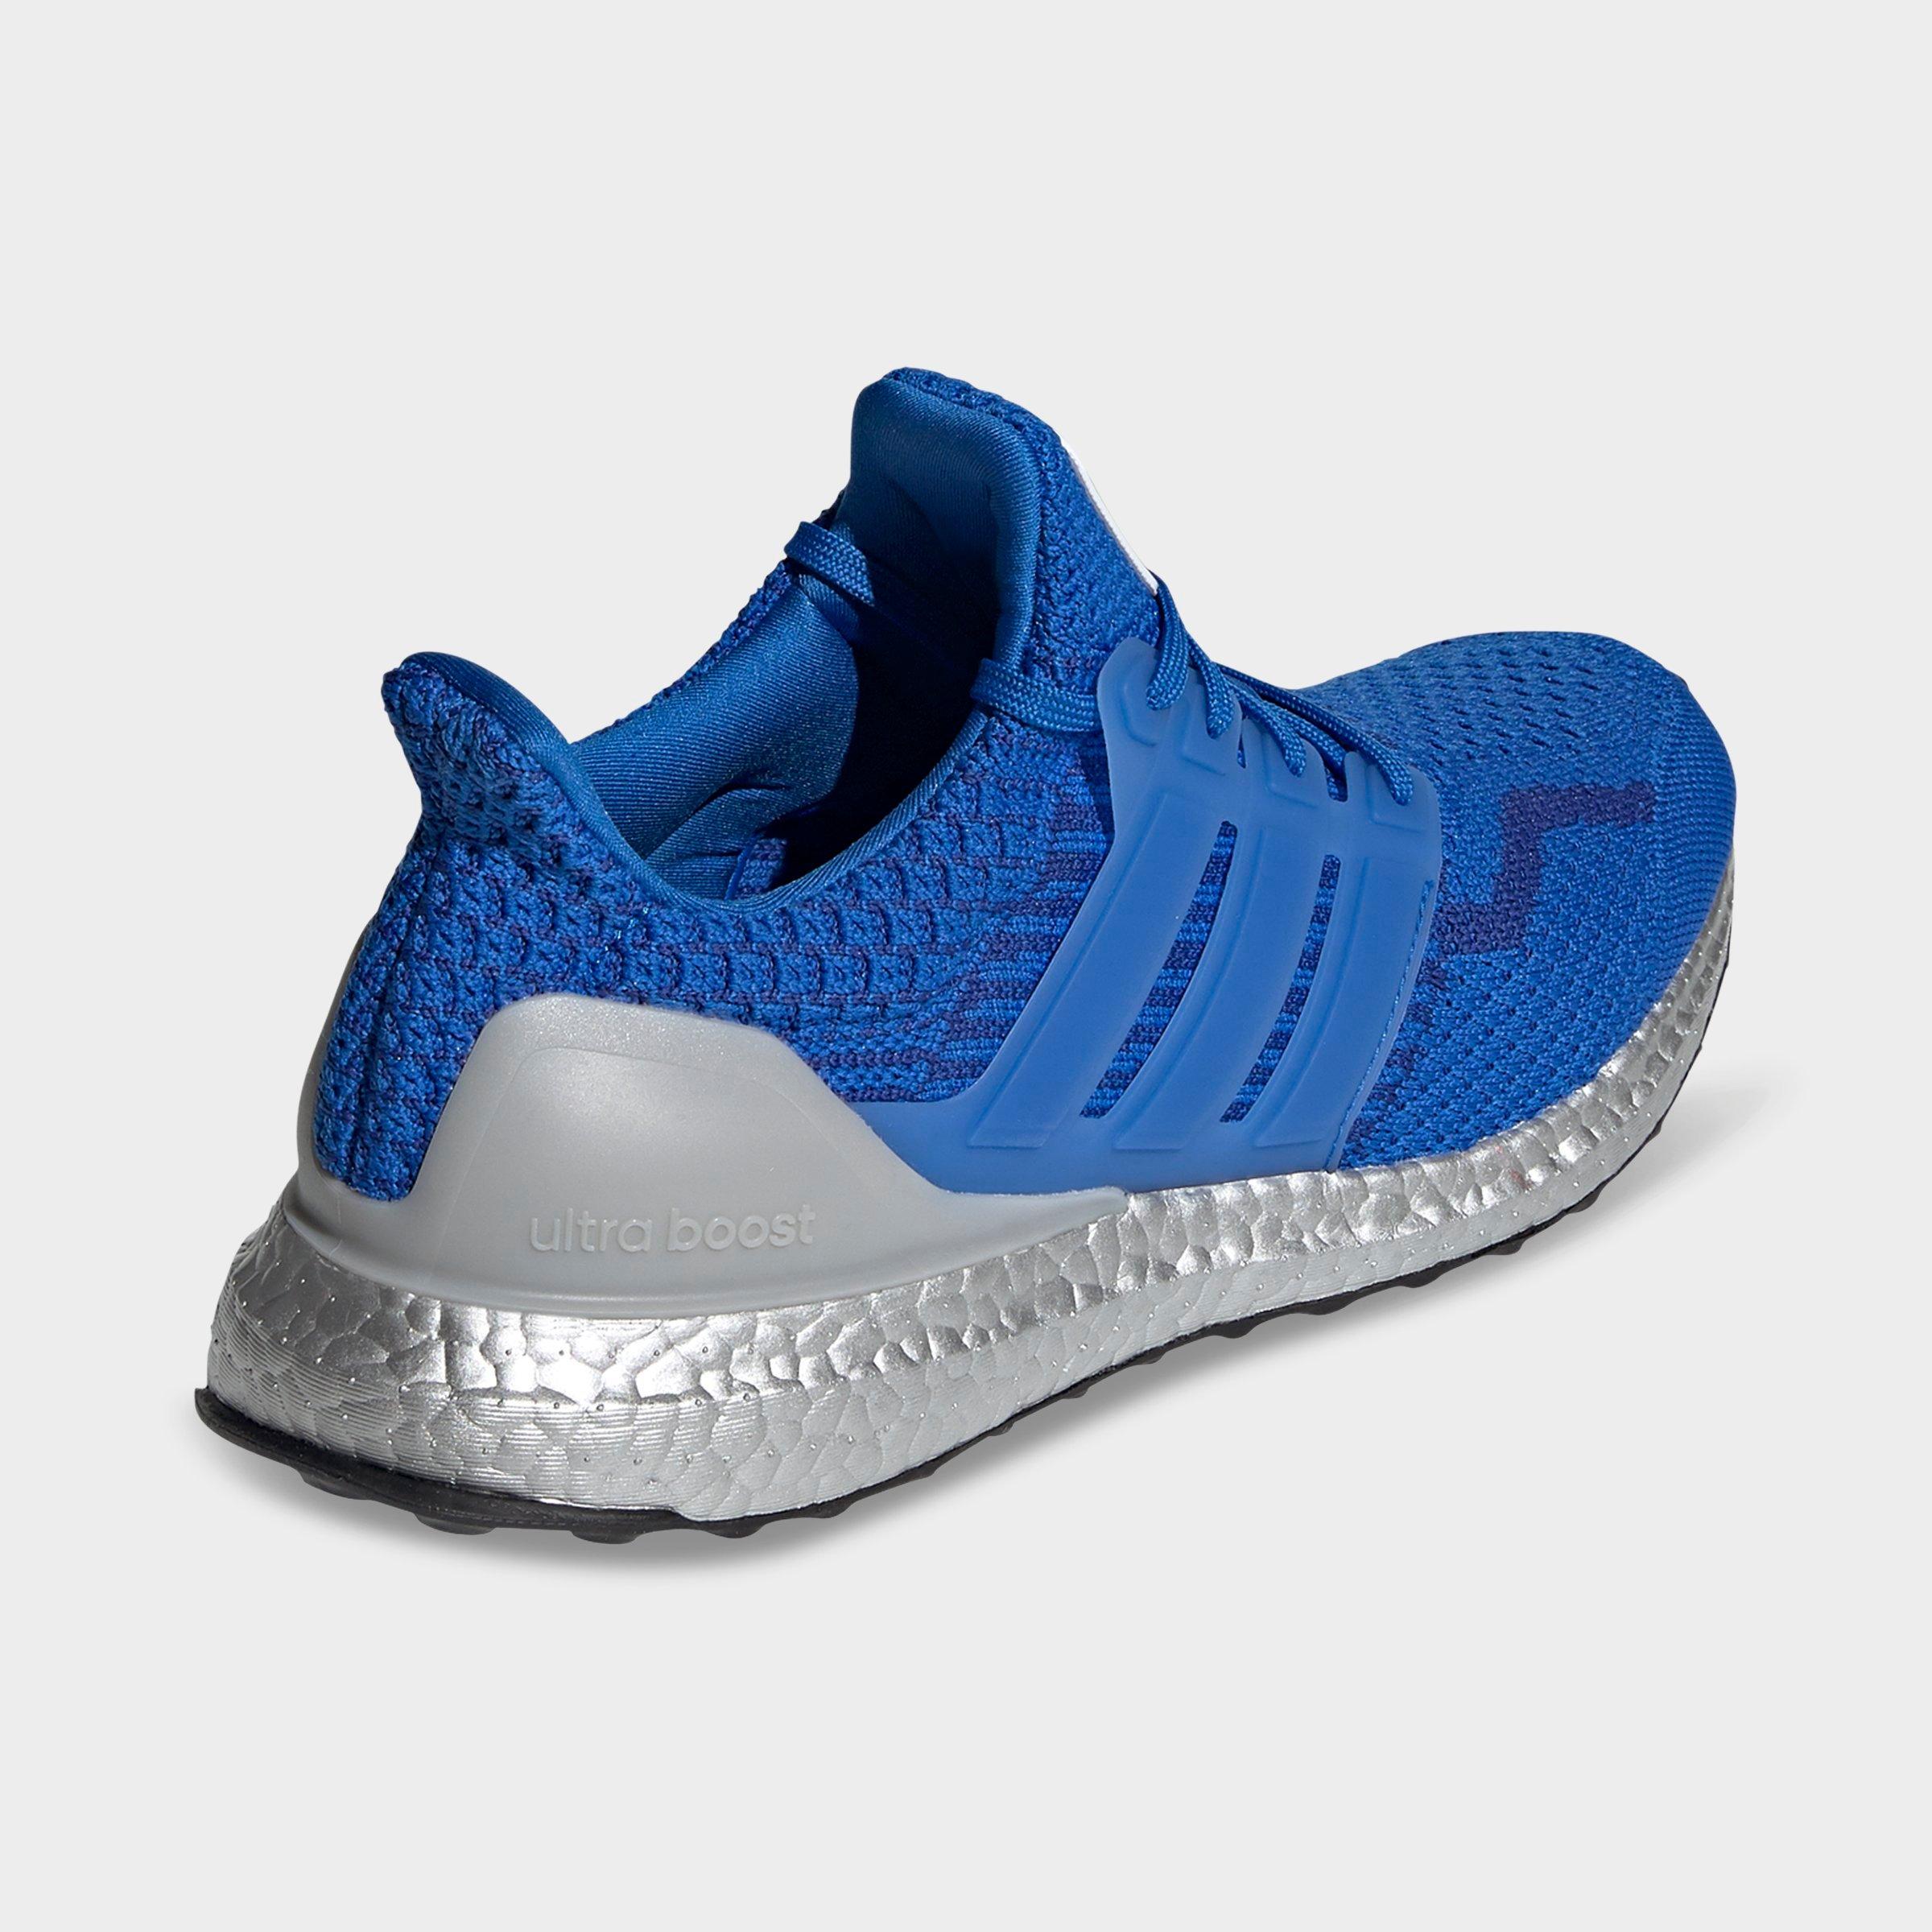 adidas ultra boost dna running shoes